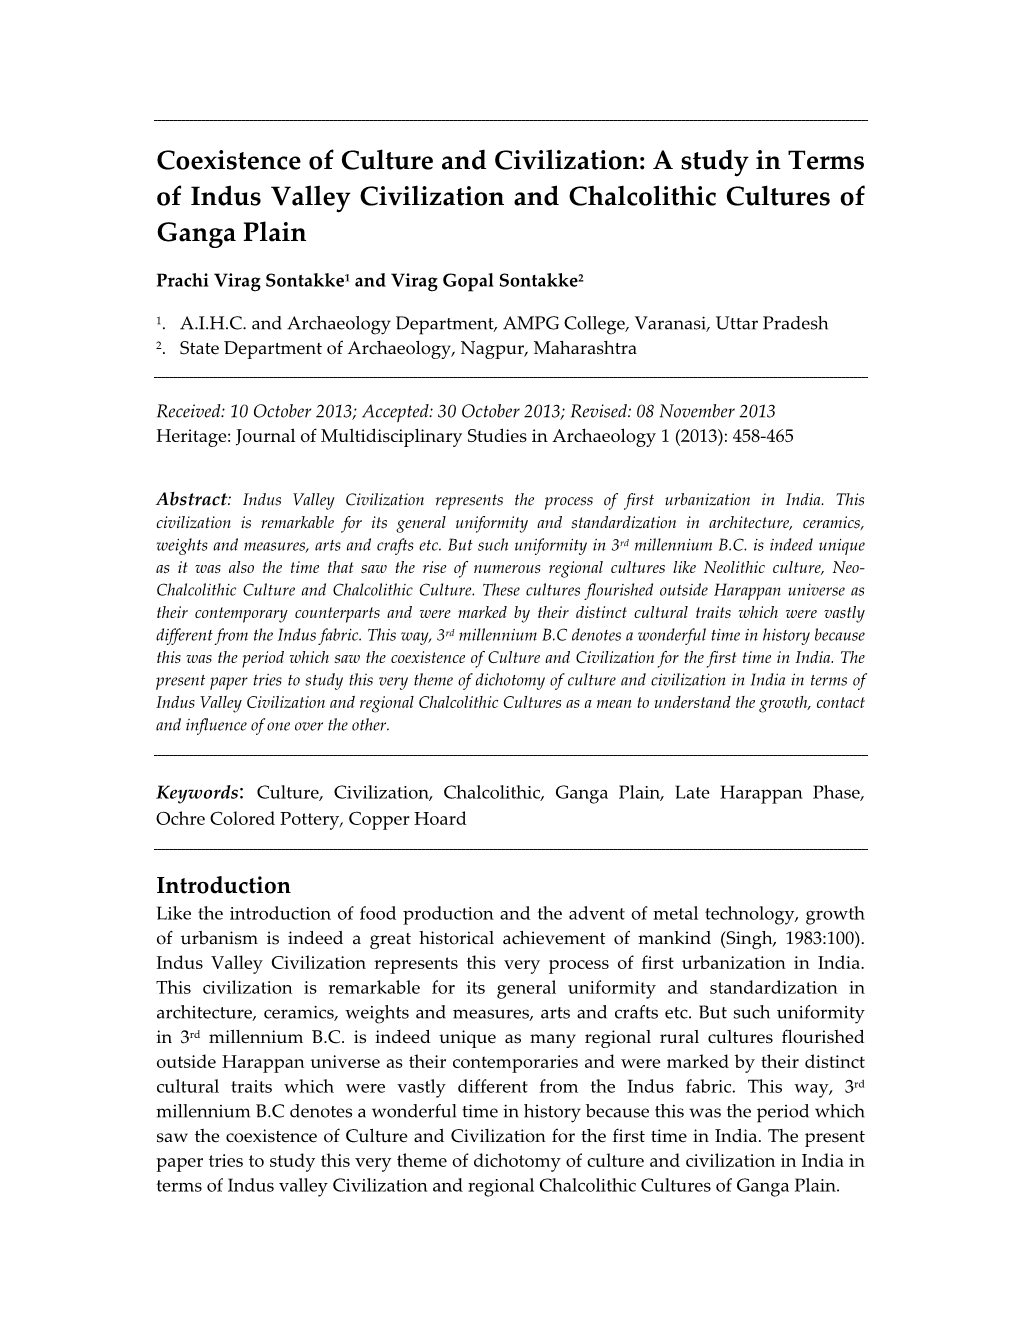 A Study in Terms of Indus Valley Civilization and Chalcolithic Cultures of Ganga Plain